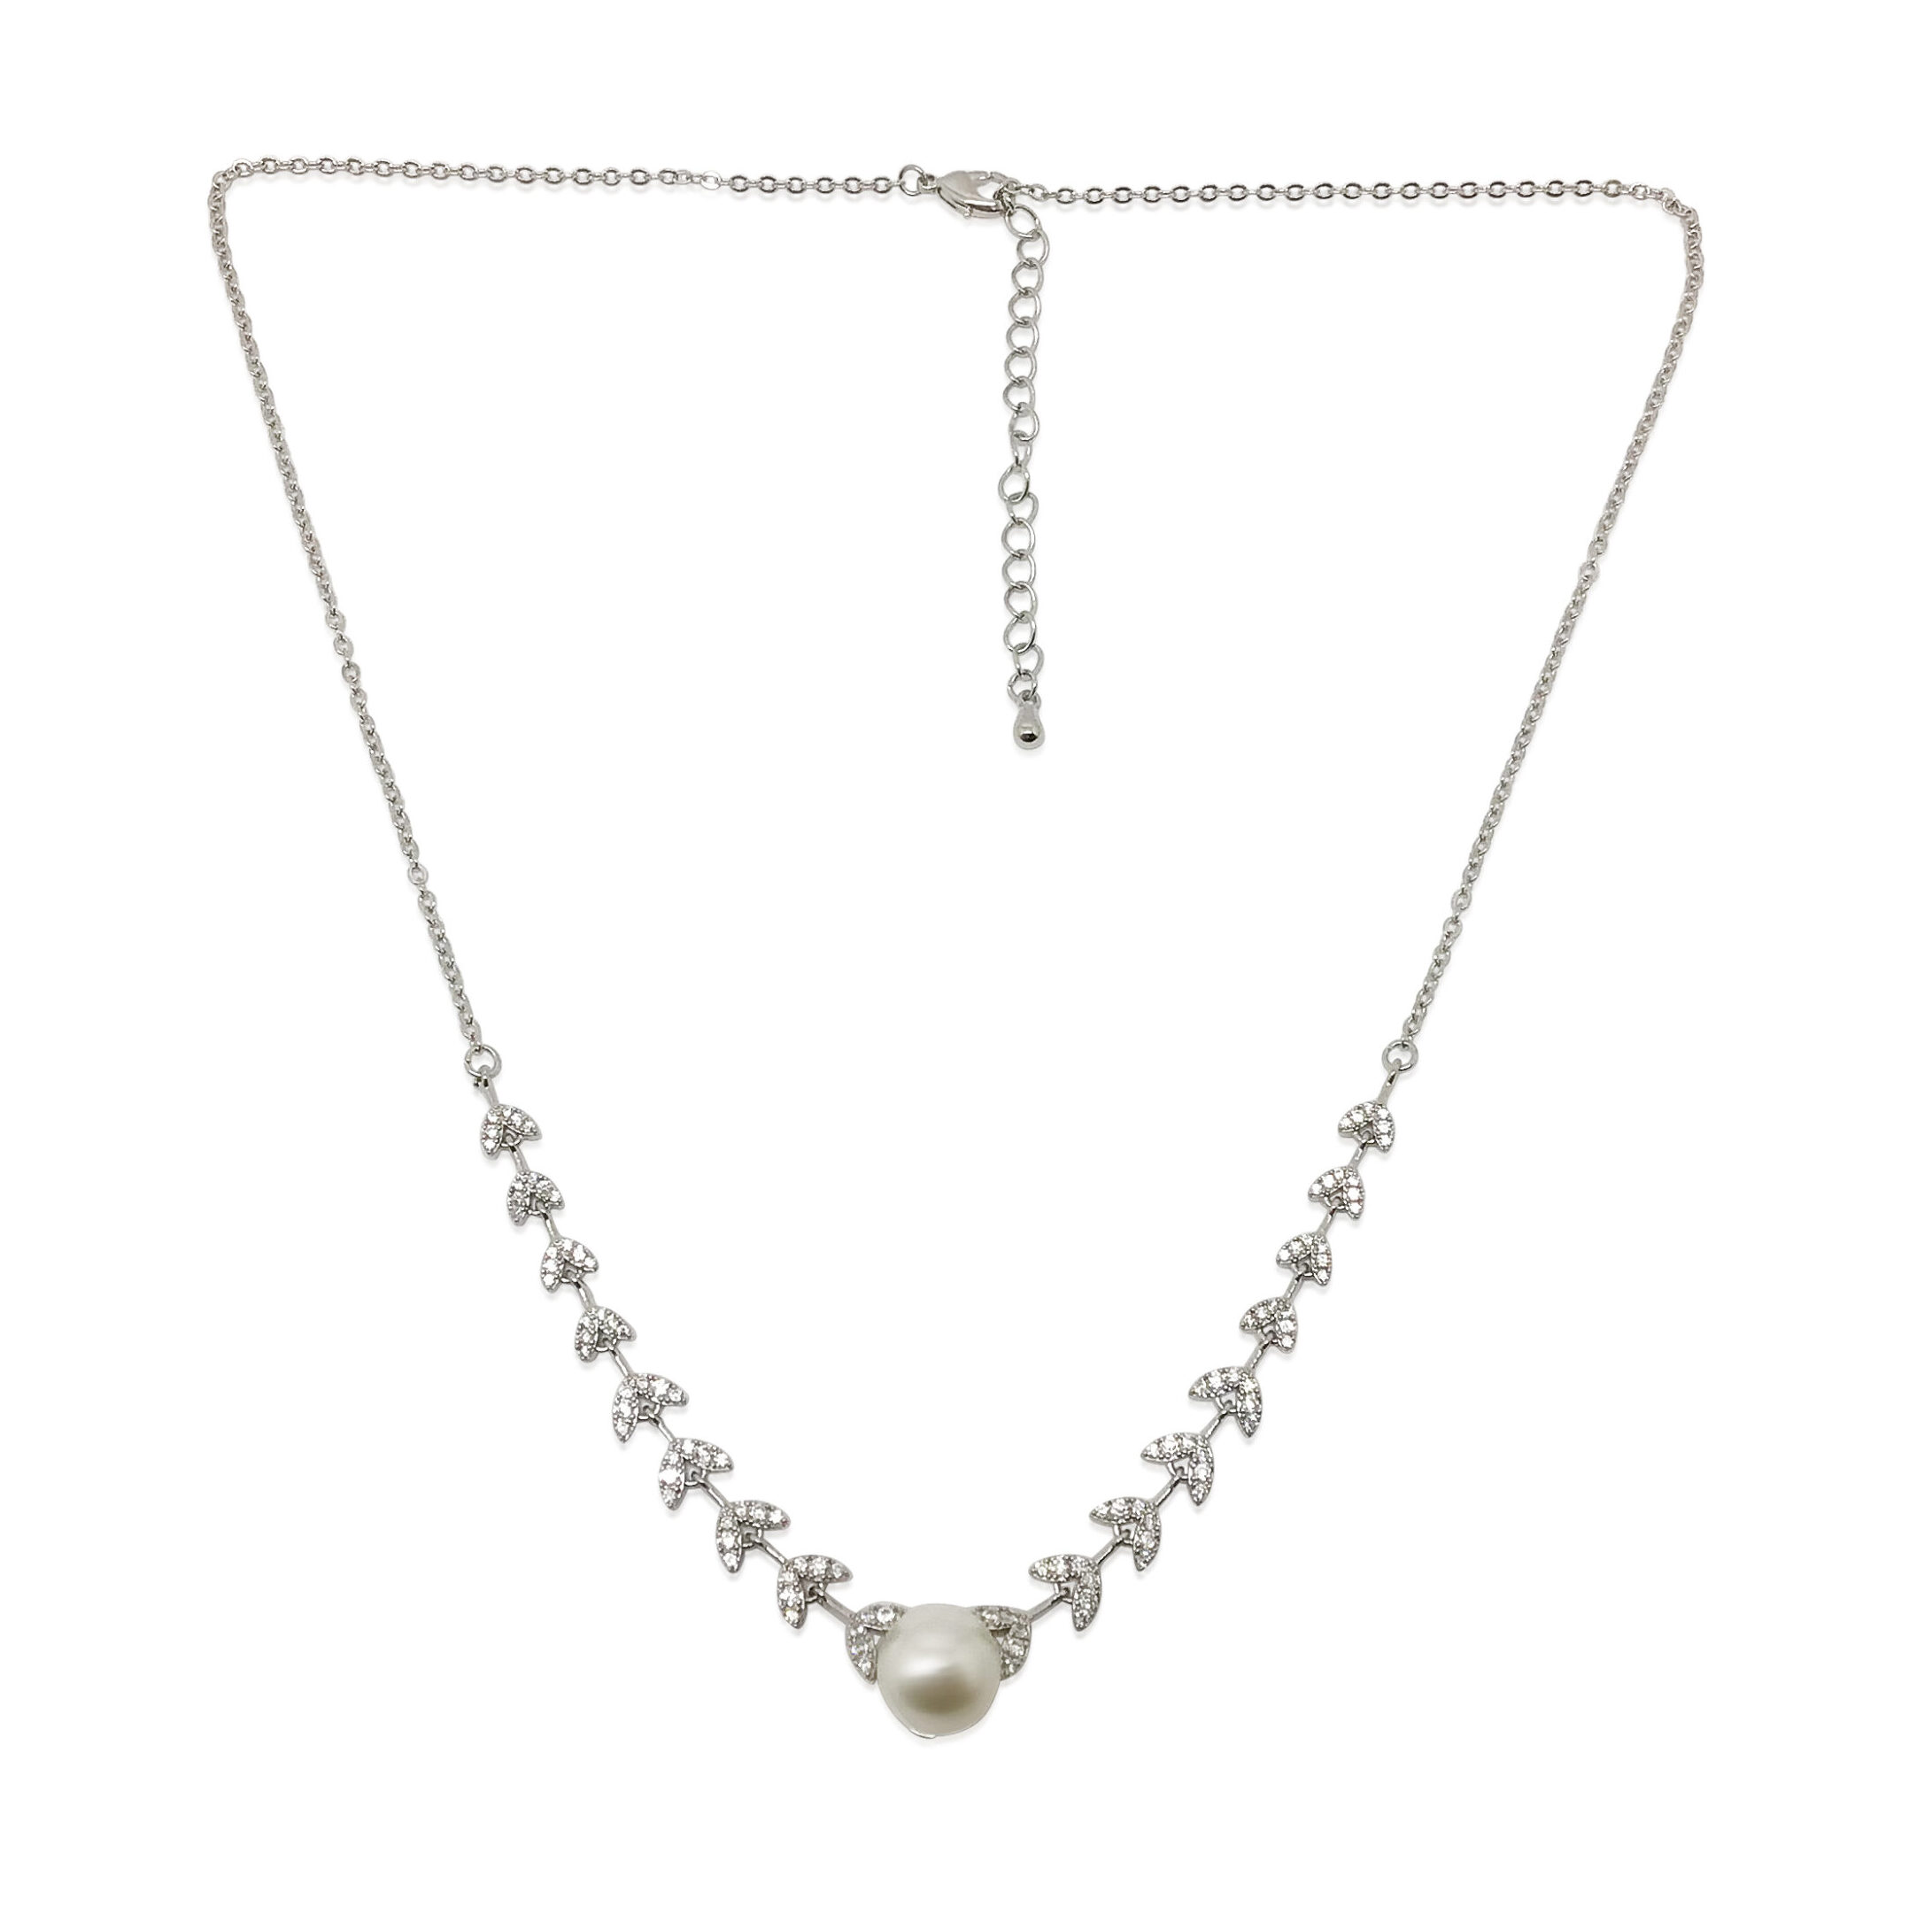 Pearl necklaces| Cassidy I Jeanette Maree|Shop online now